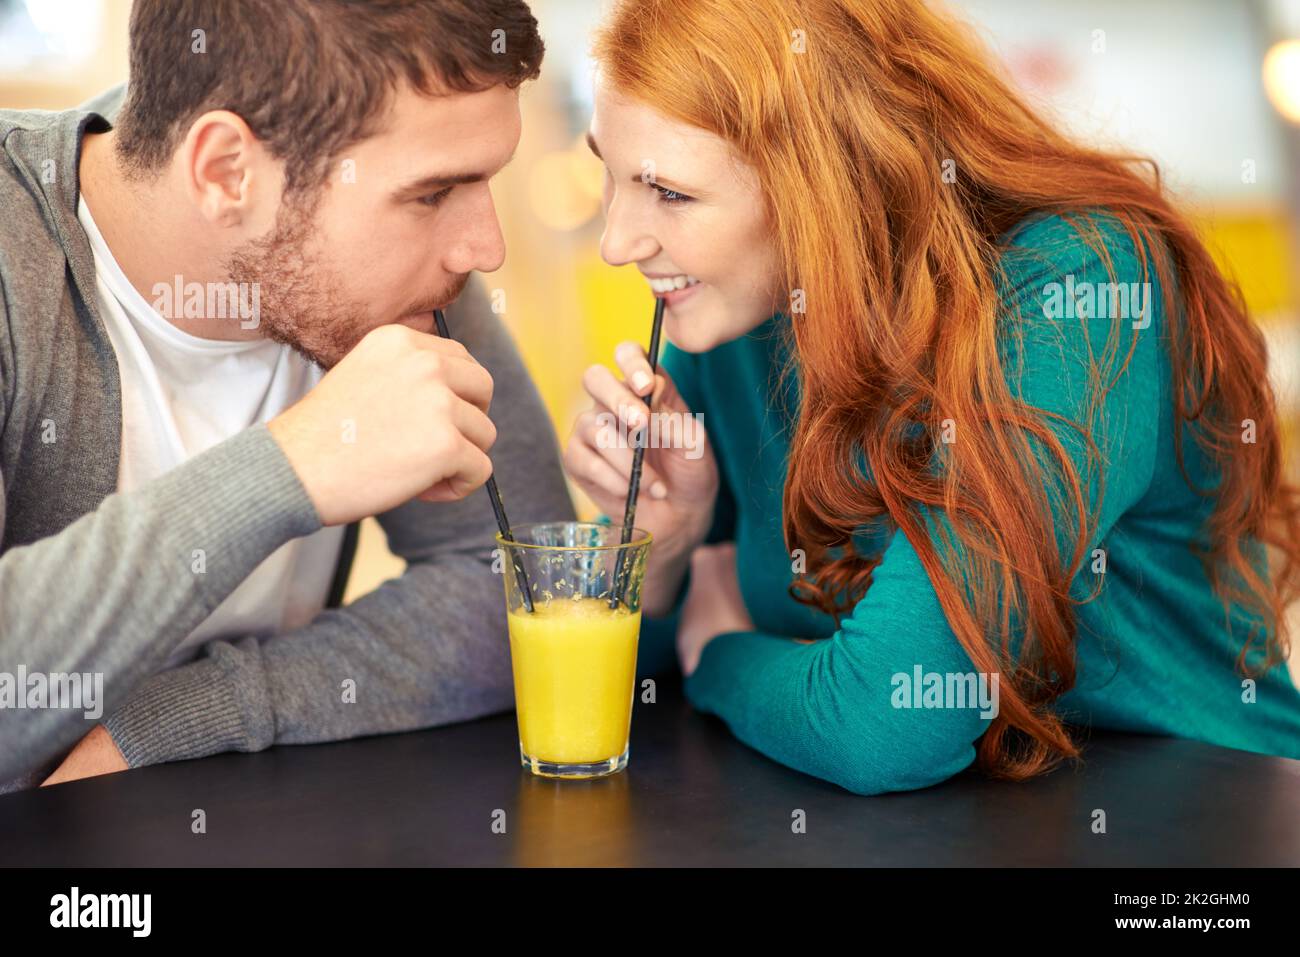 Juicy romance. Cropped shot of a happy young couple sharing a glass of juice on a date at a cafe. Stock Photo